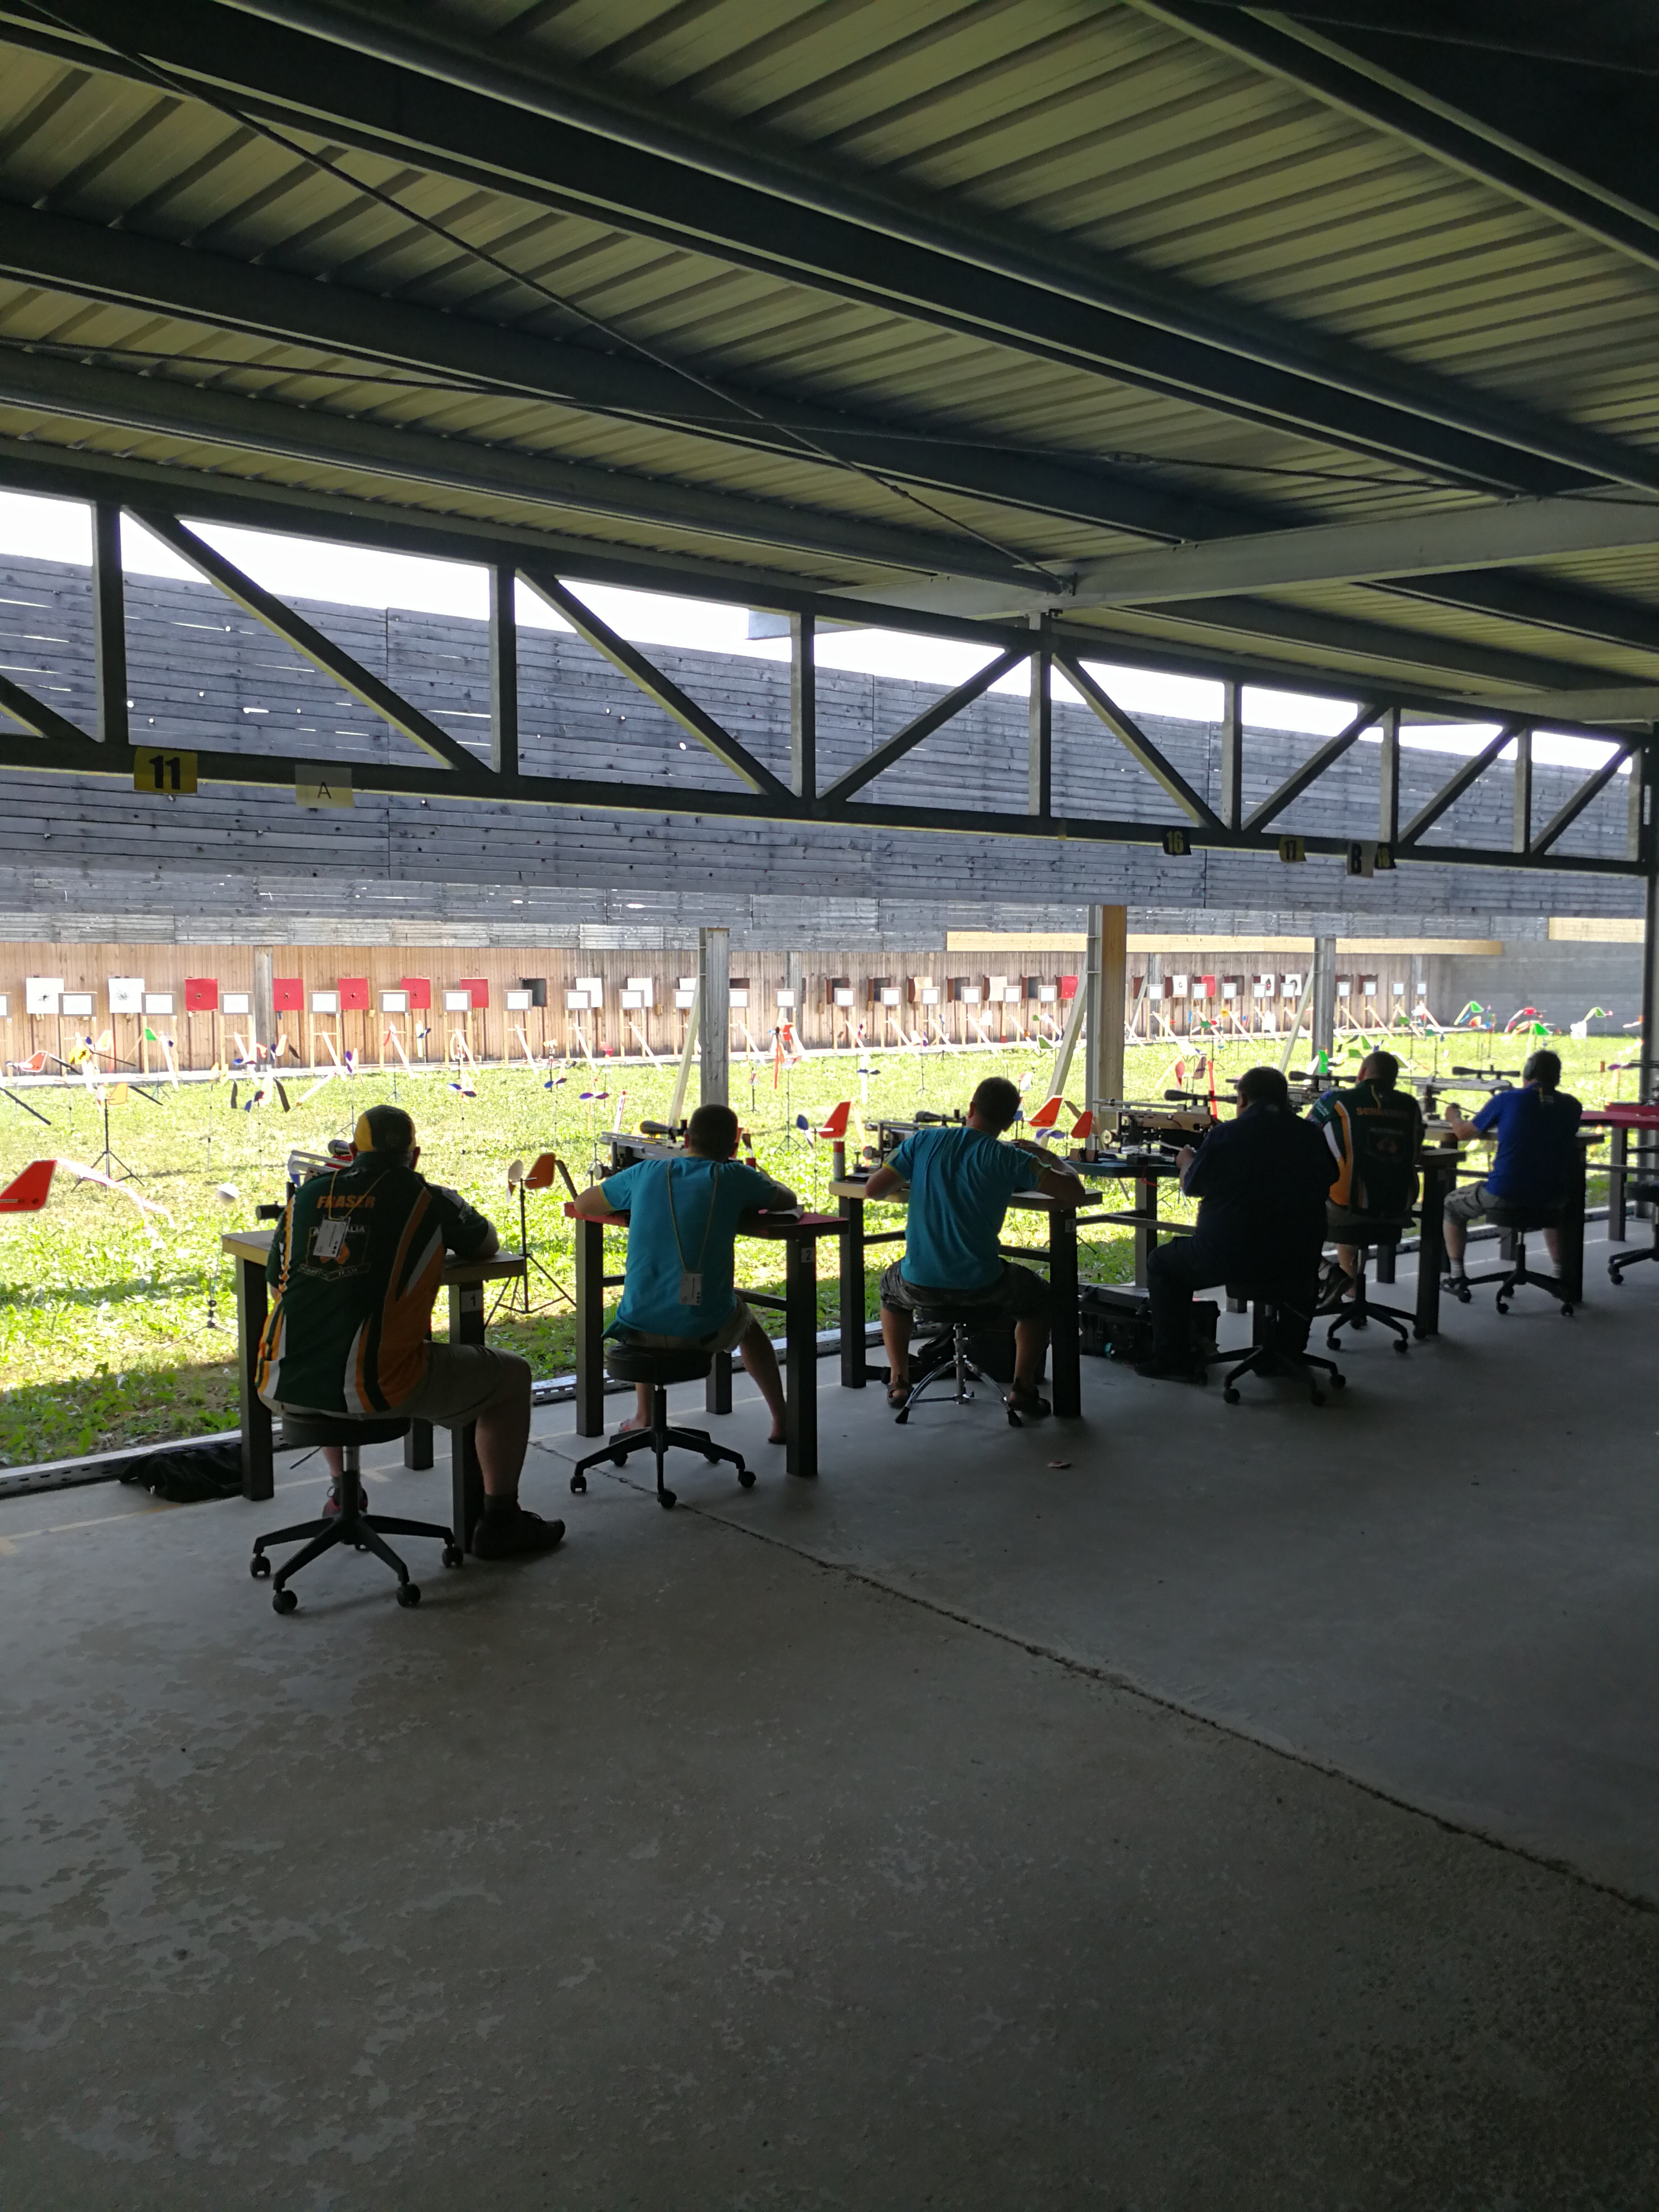 A Benchrest riflescope Competition - us